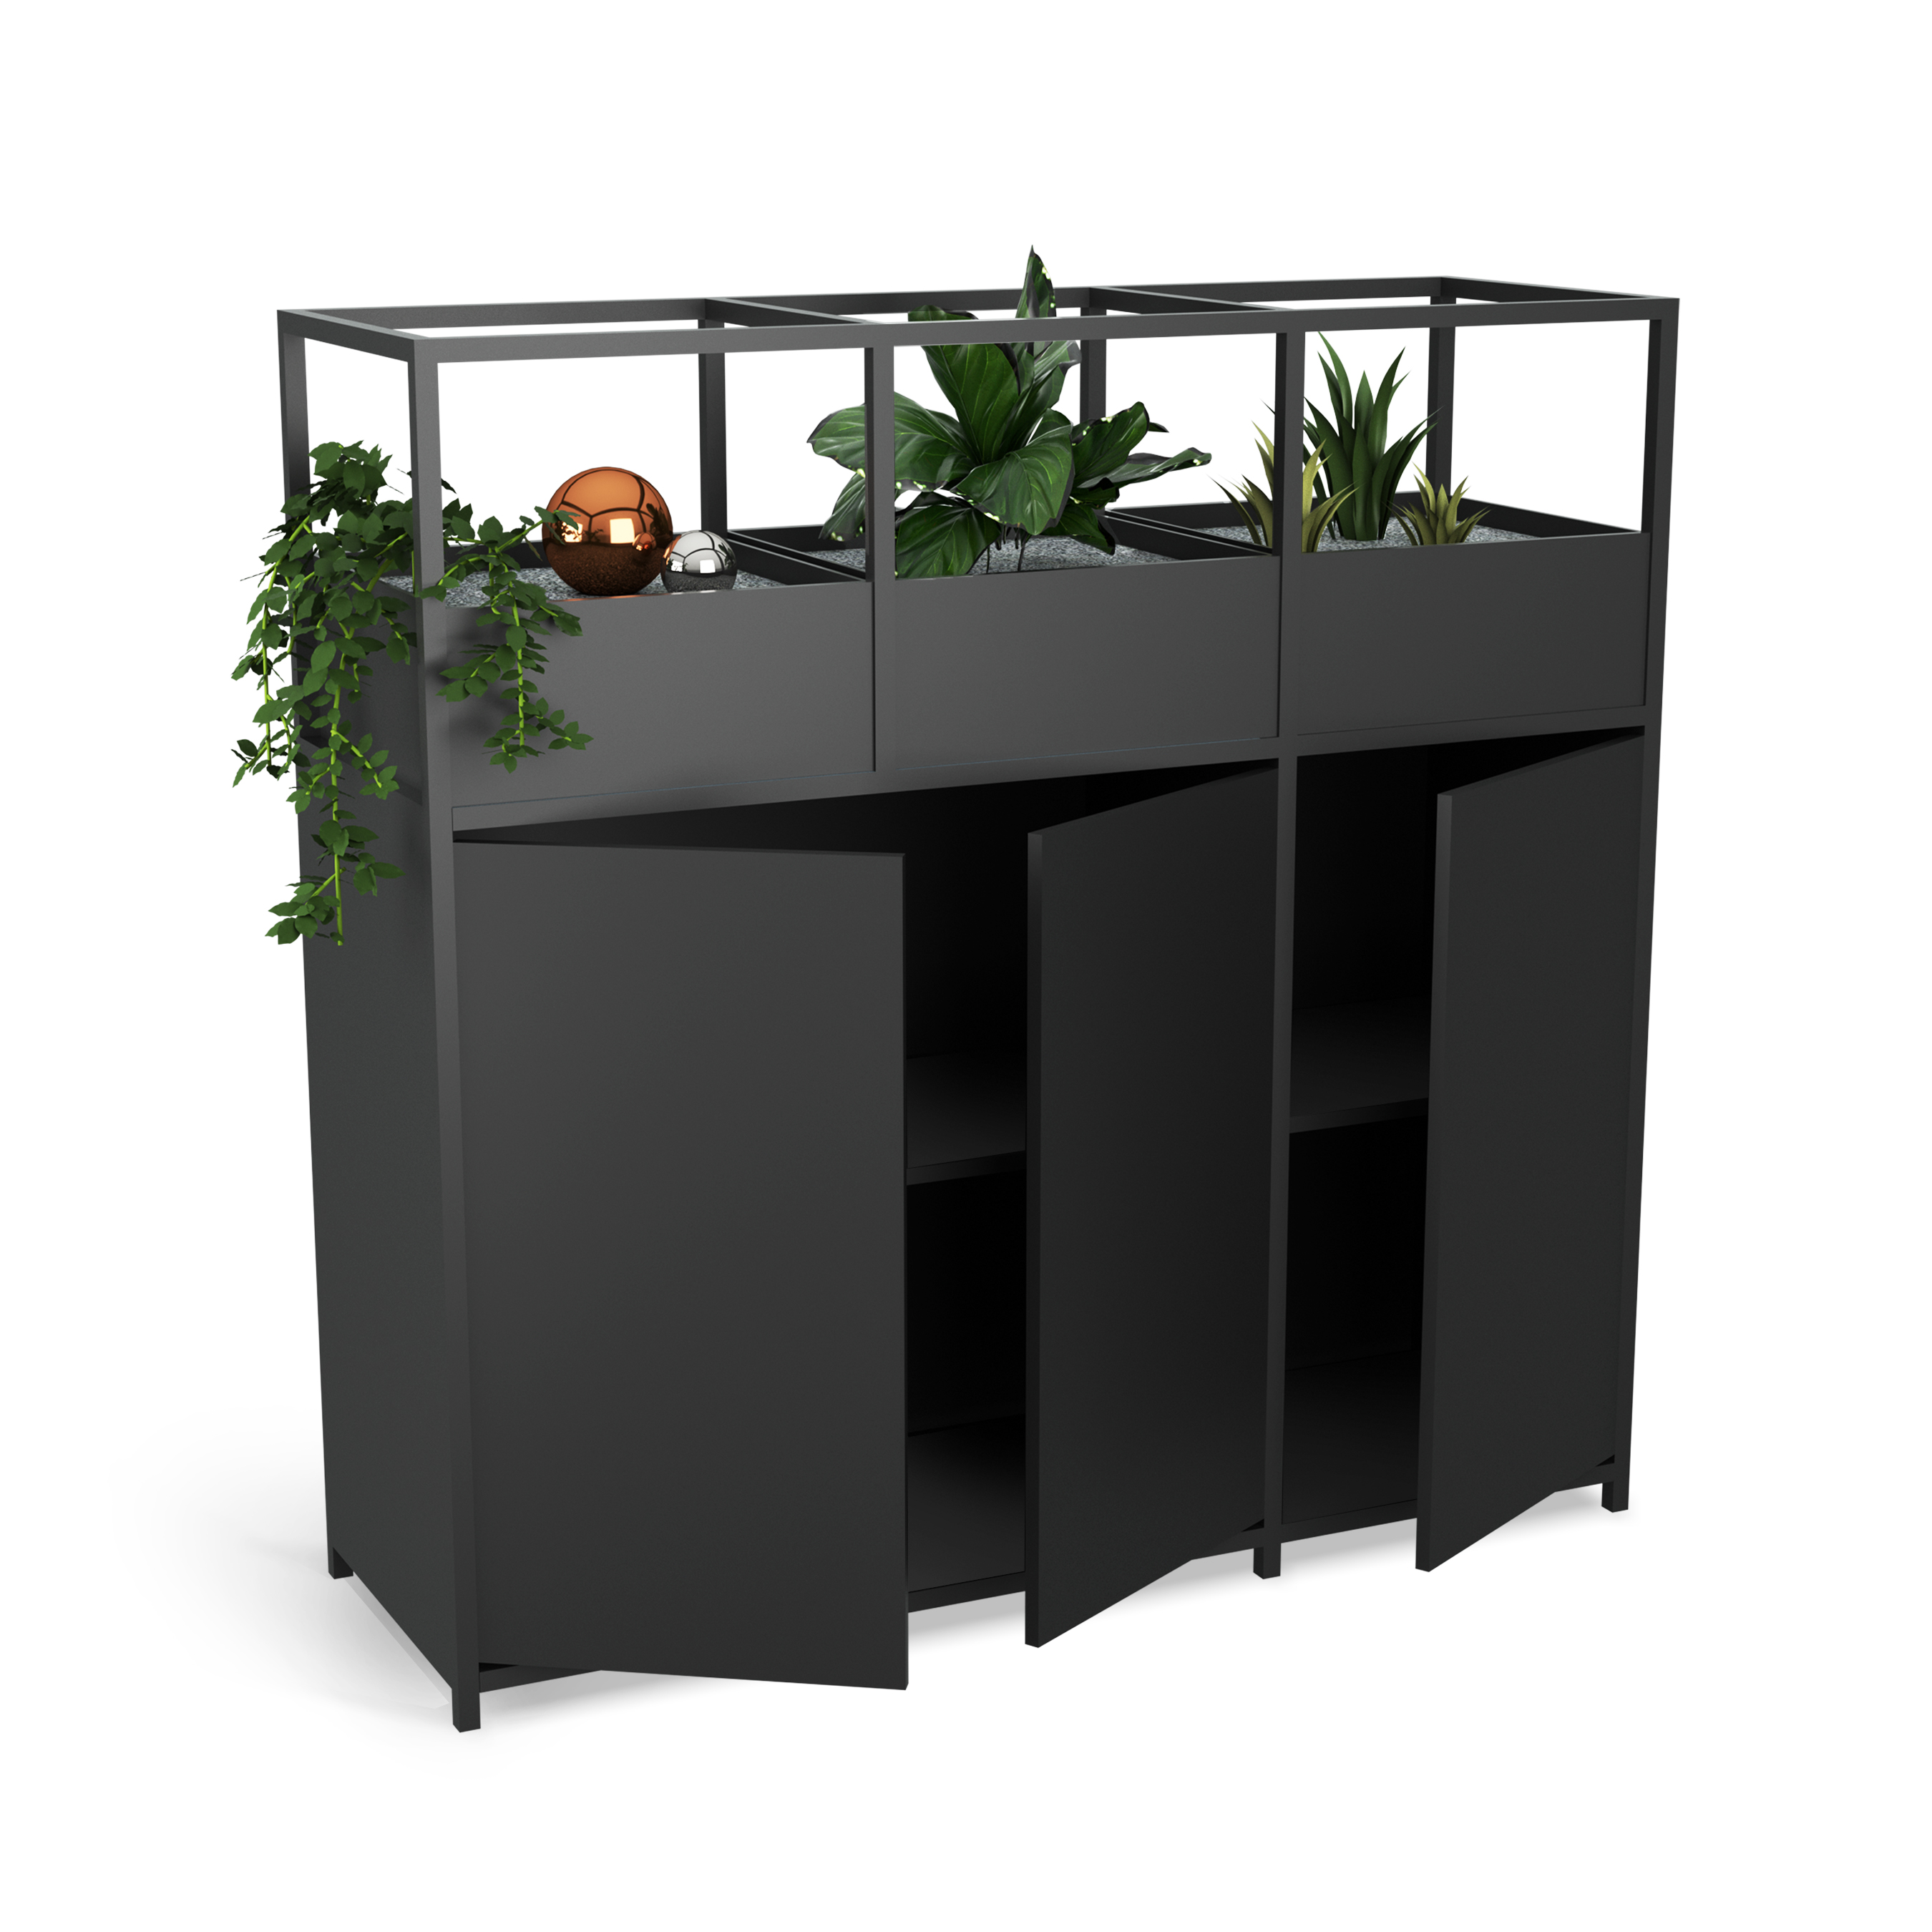 WS - Render - Urban Connect - Black - planter and cupboard x 3